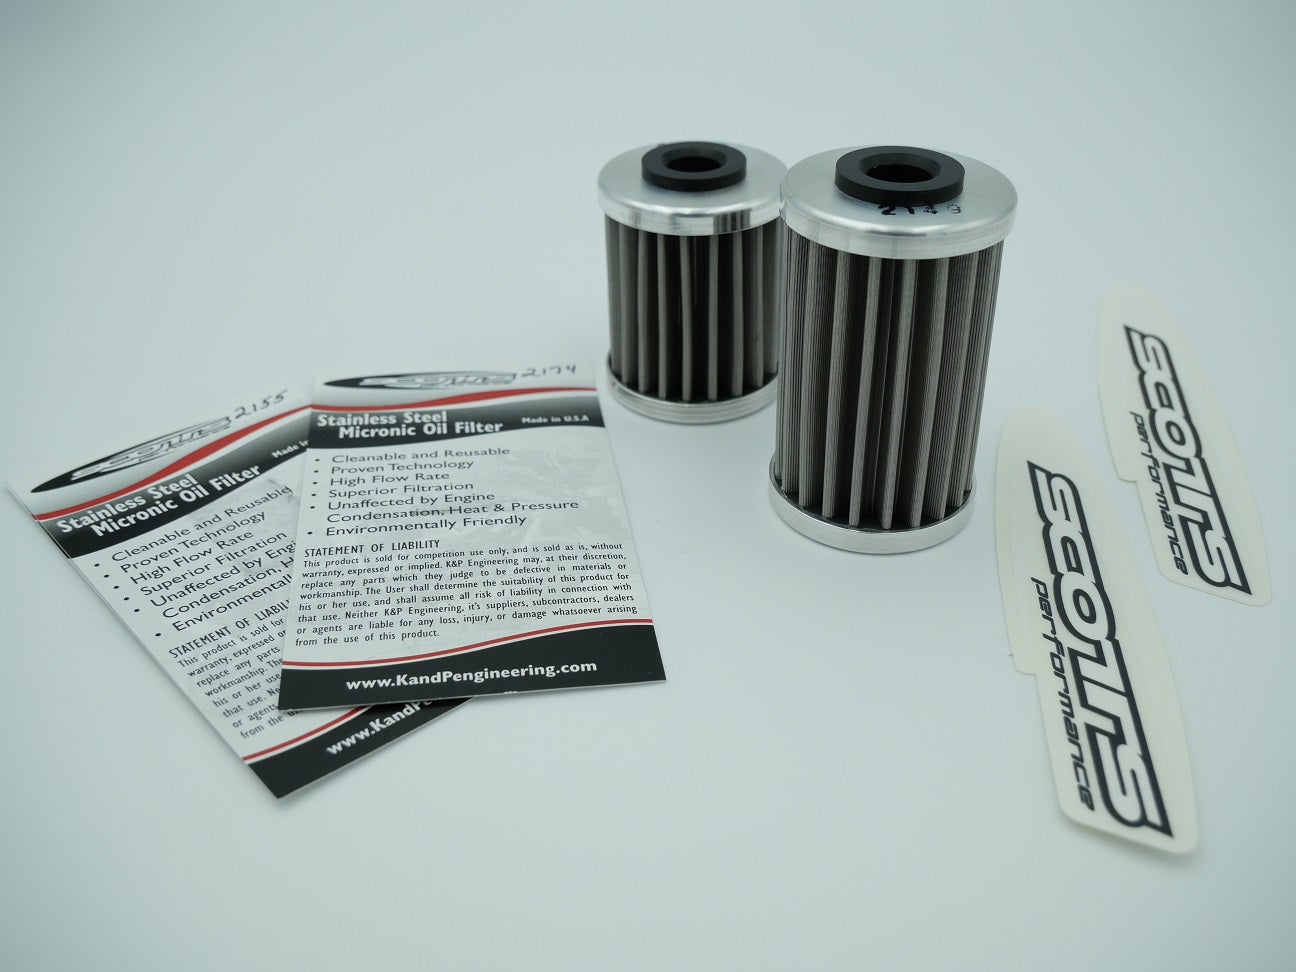 Scotts - Stainless Steel Micronic Reusable Oil Filters for KTM 250/400/520/525/690 and Husqvarna 701 AND Beta 400-525 (Combo pack)